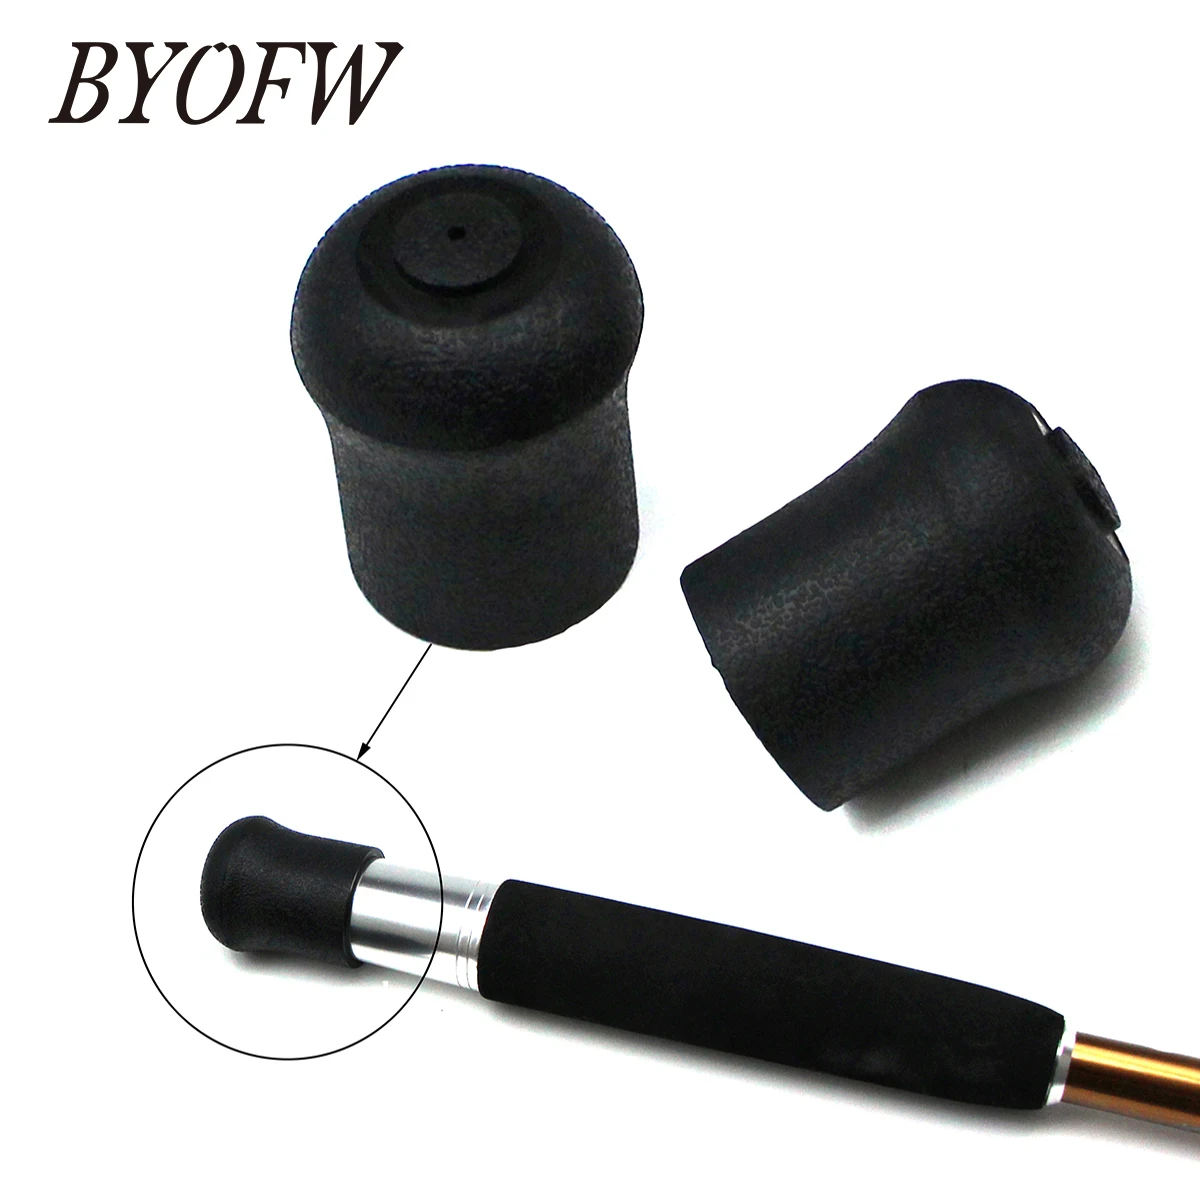 BYOFW 1 Piece Fishing Rod Handle Butt End Cap Black Durable Pole Protector  Building DIY Repair Or Replacement Cover Components - AliExpress